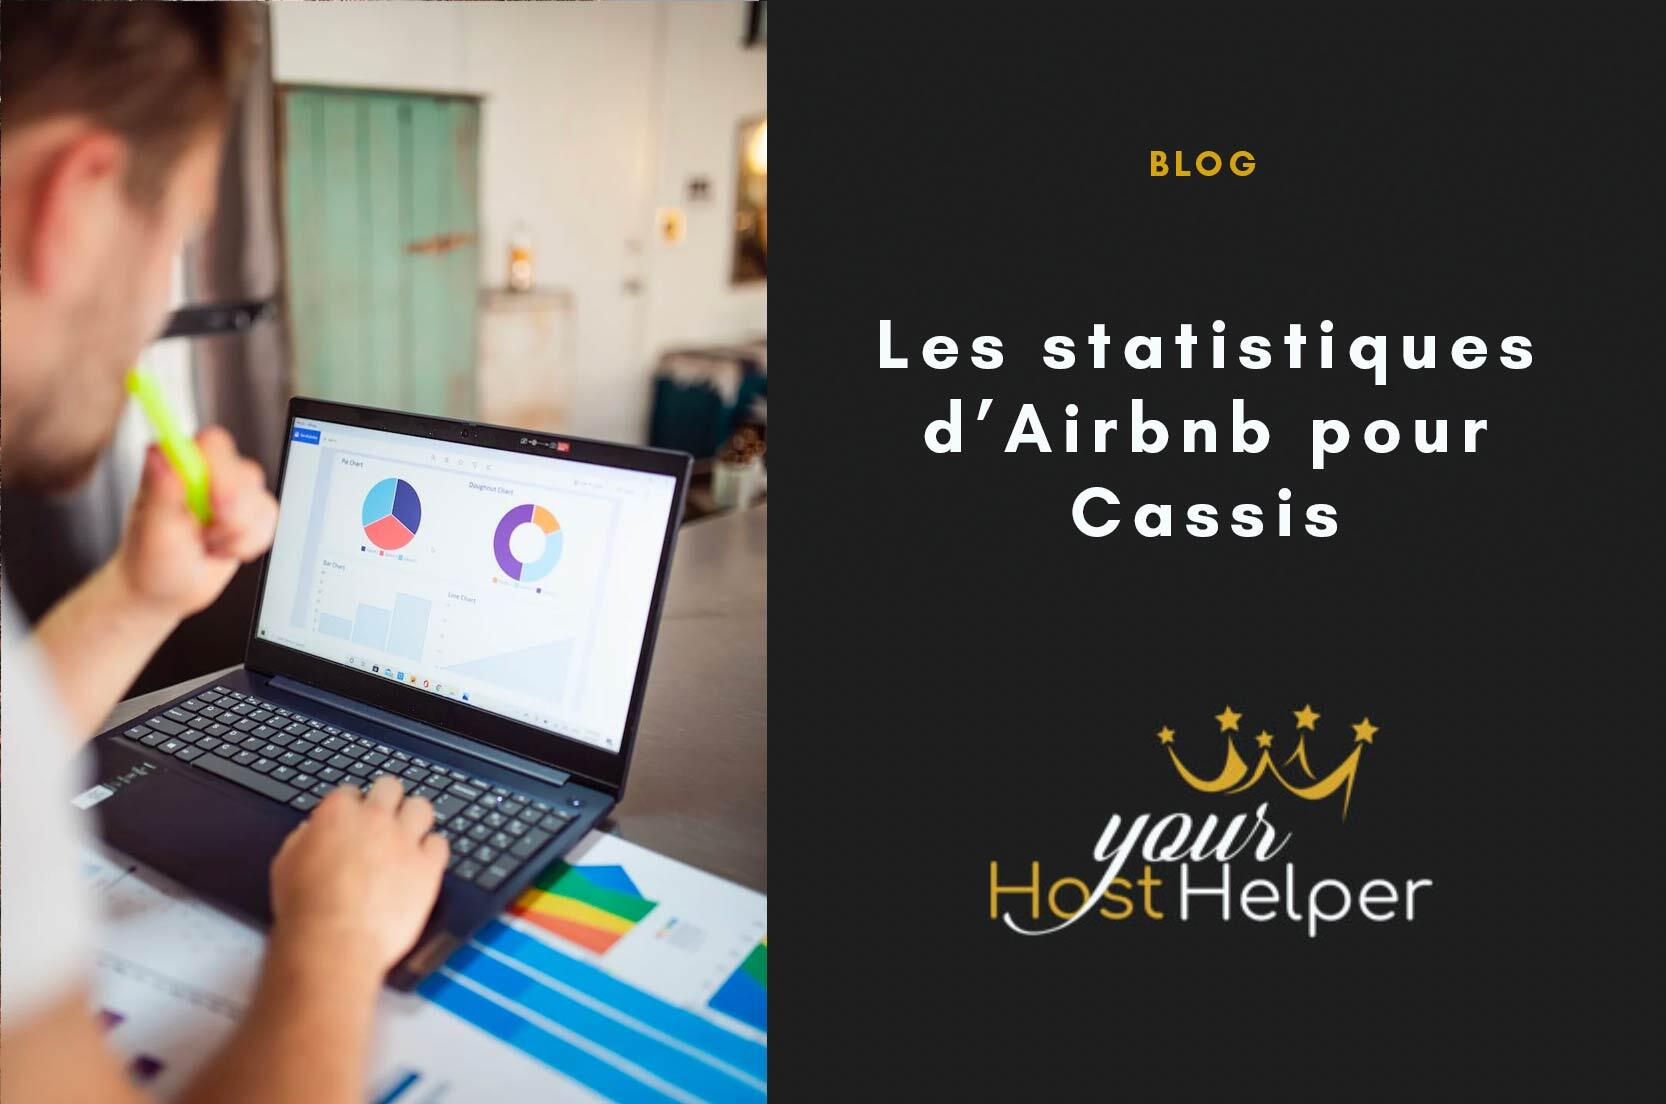 You are currently viewing Airbnb statistics in Cassis: our concierge service gives you all the details